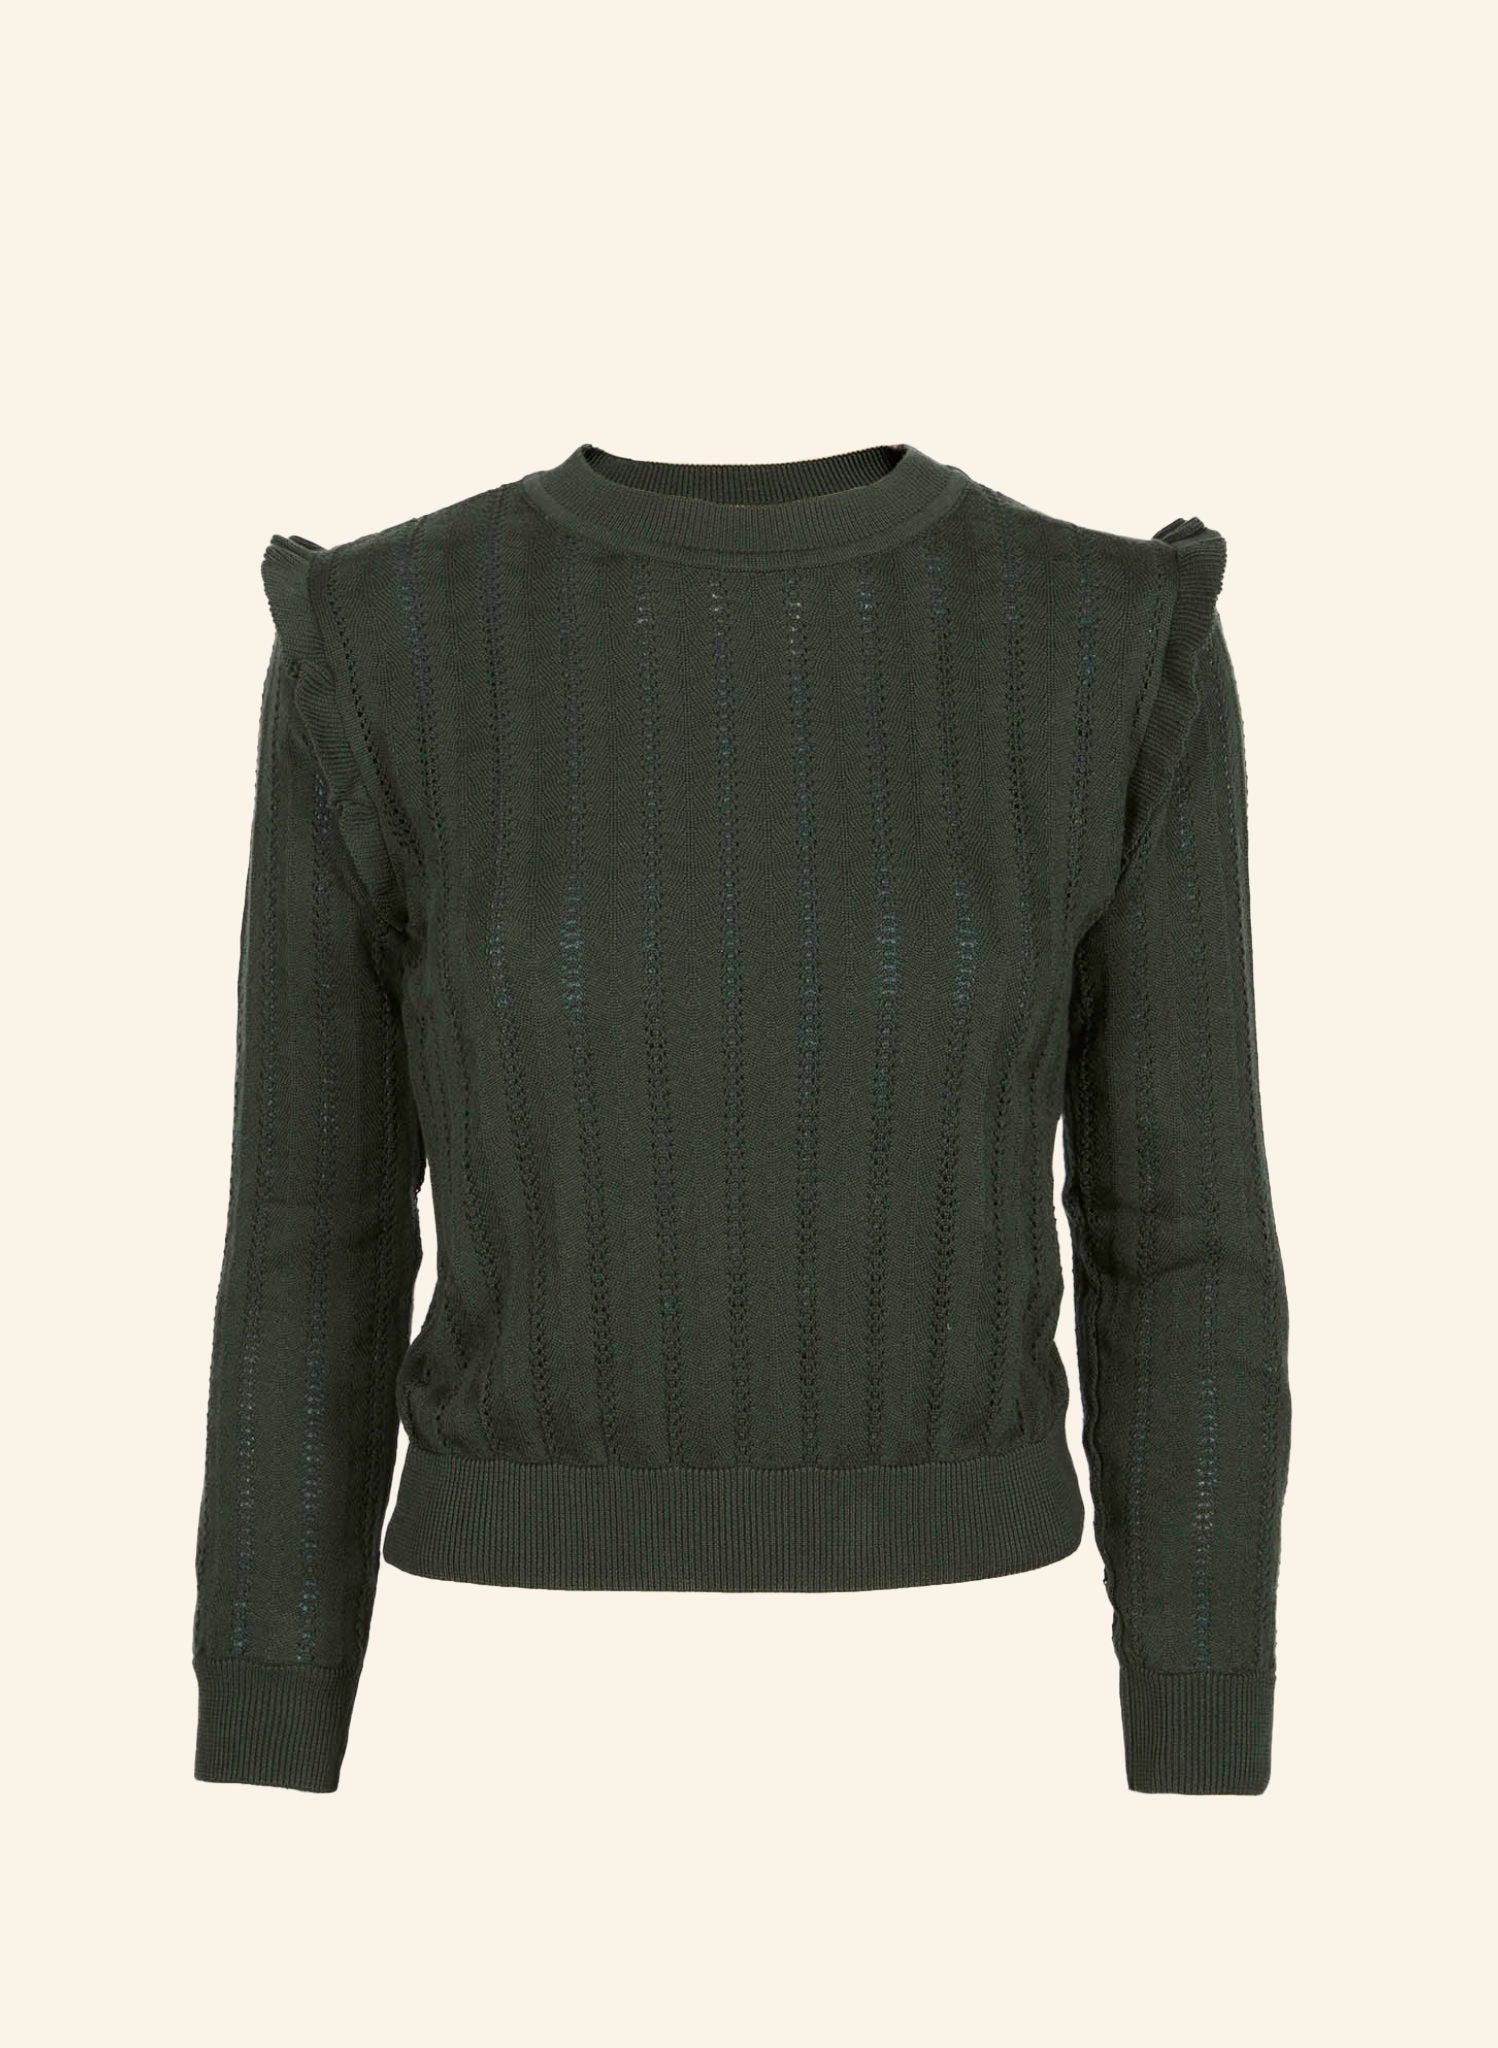 Diana - Forest Green Ruffle Knitted Top